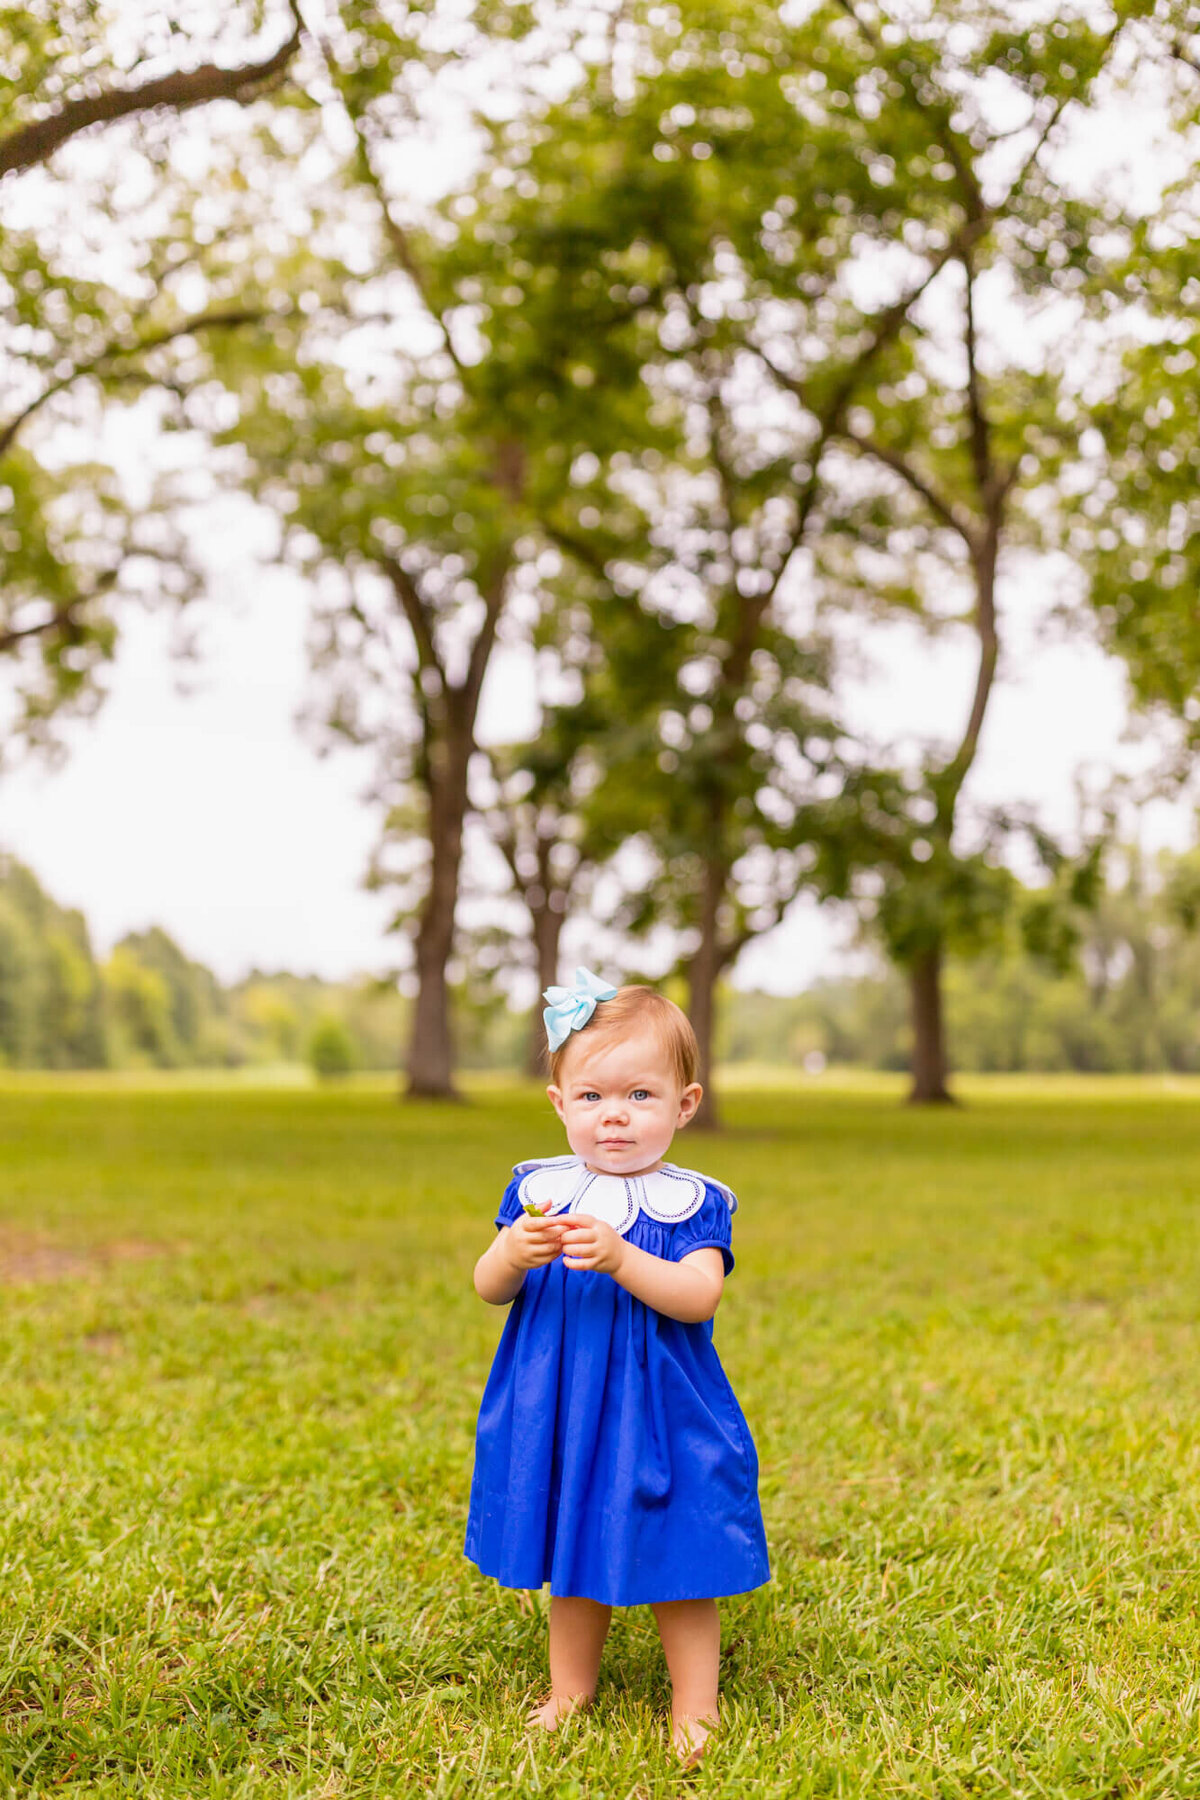 baby girl plays in a field of grass in a blue dress